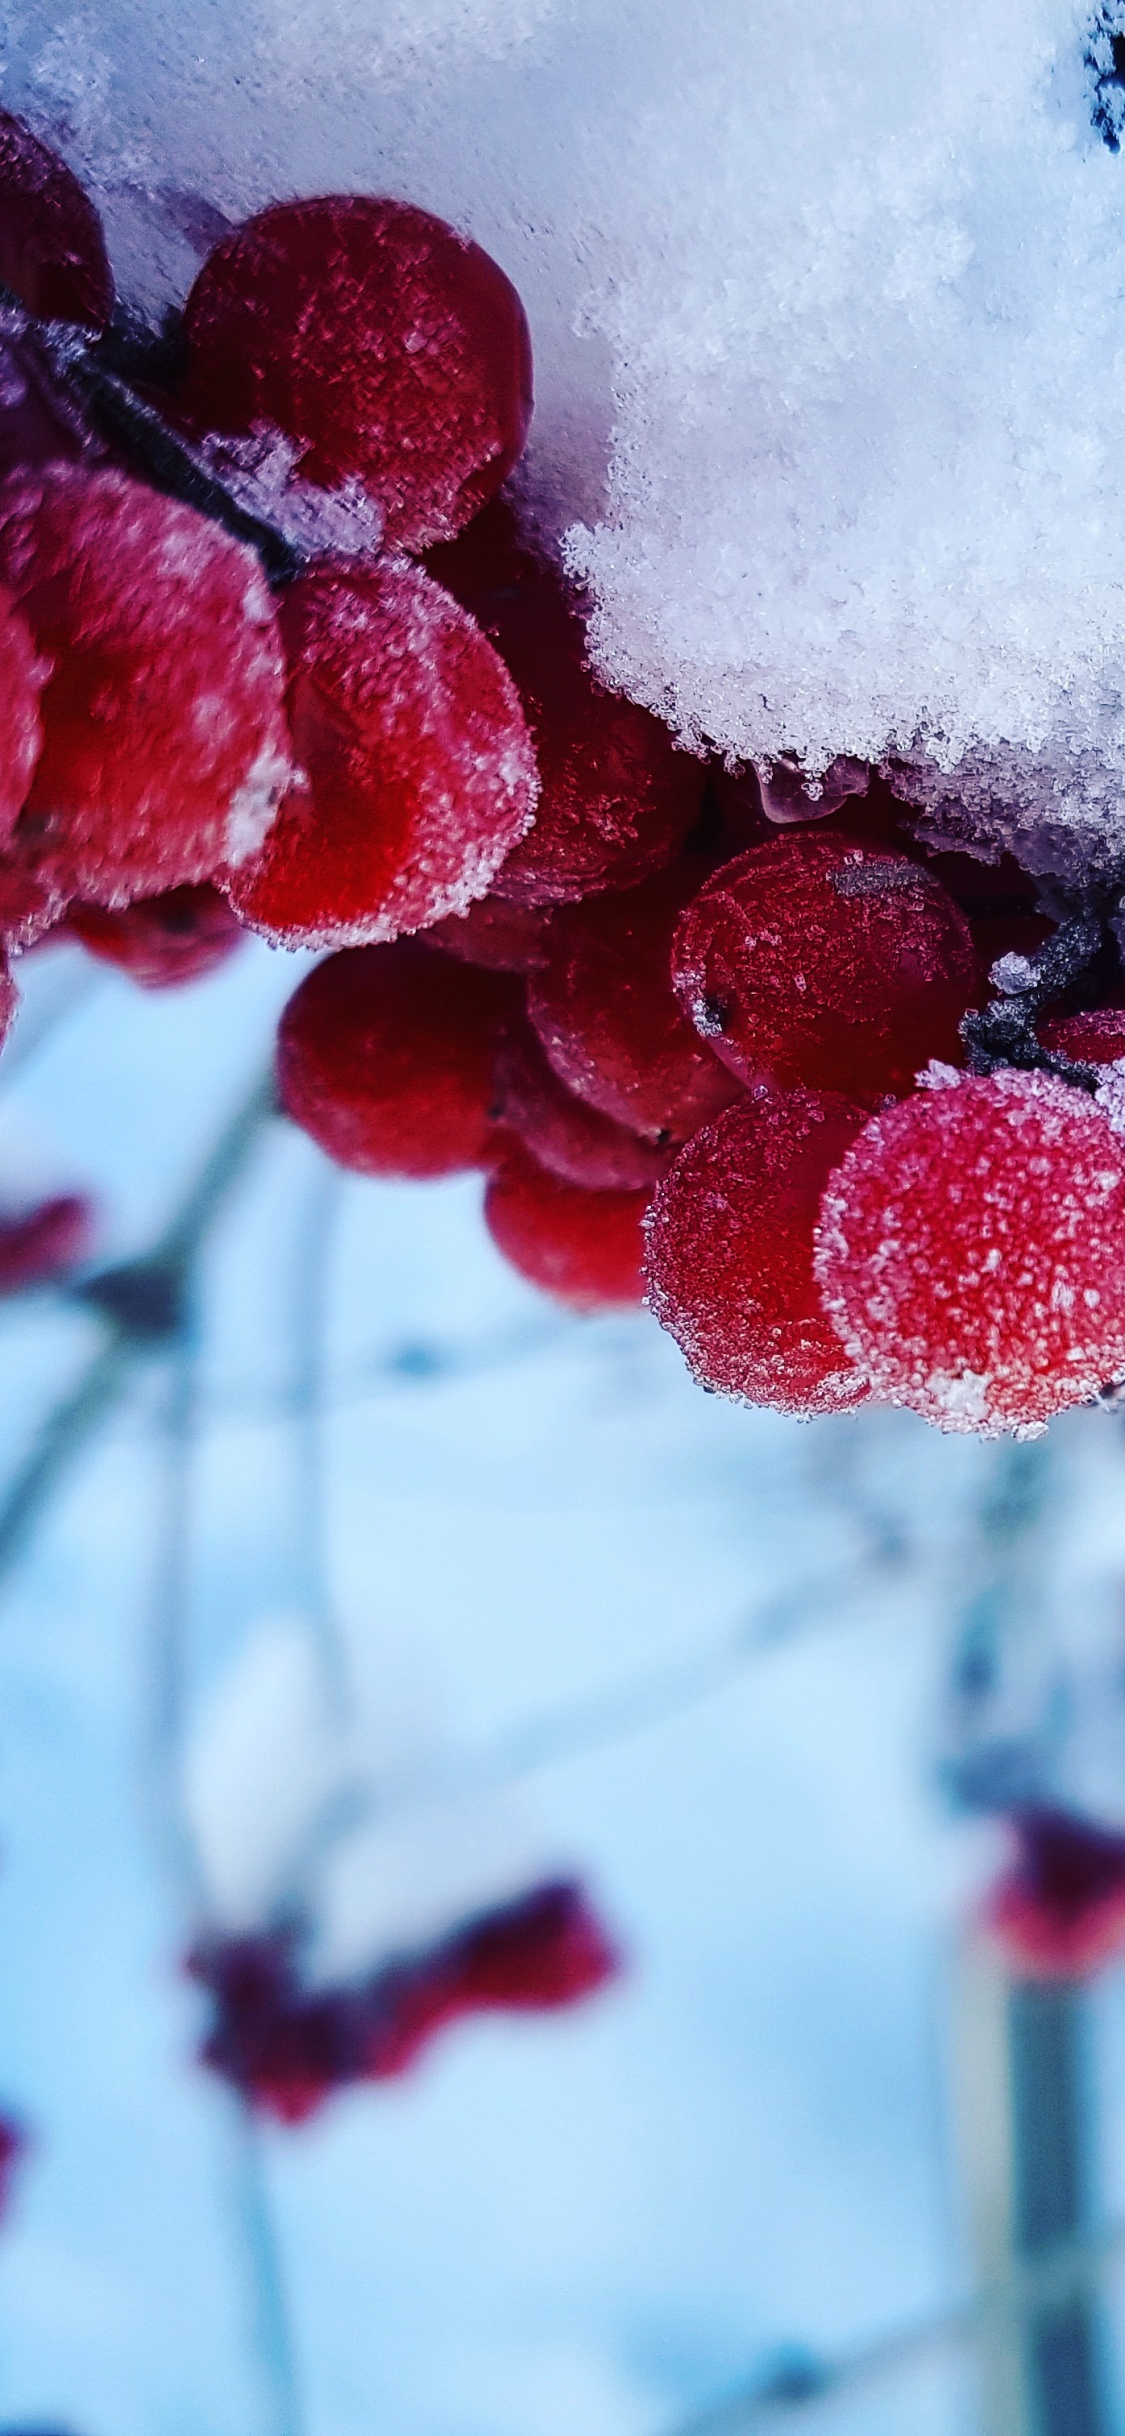 Red Round Fruits Covered With Snow. Wallpaper in 1125x2436 Resolution